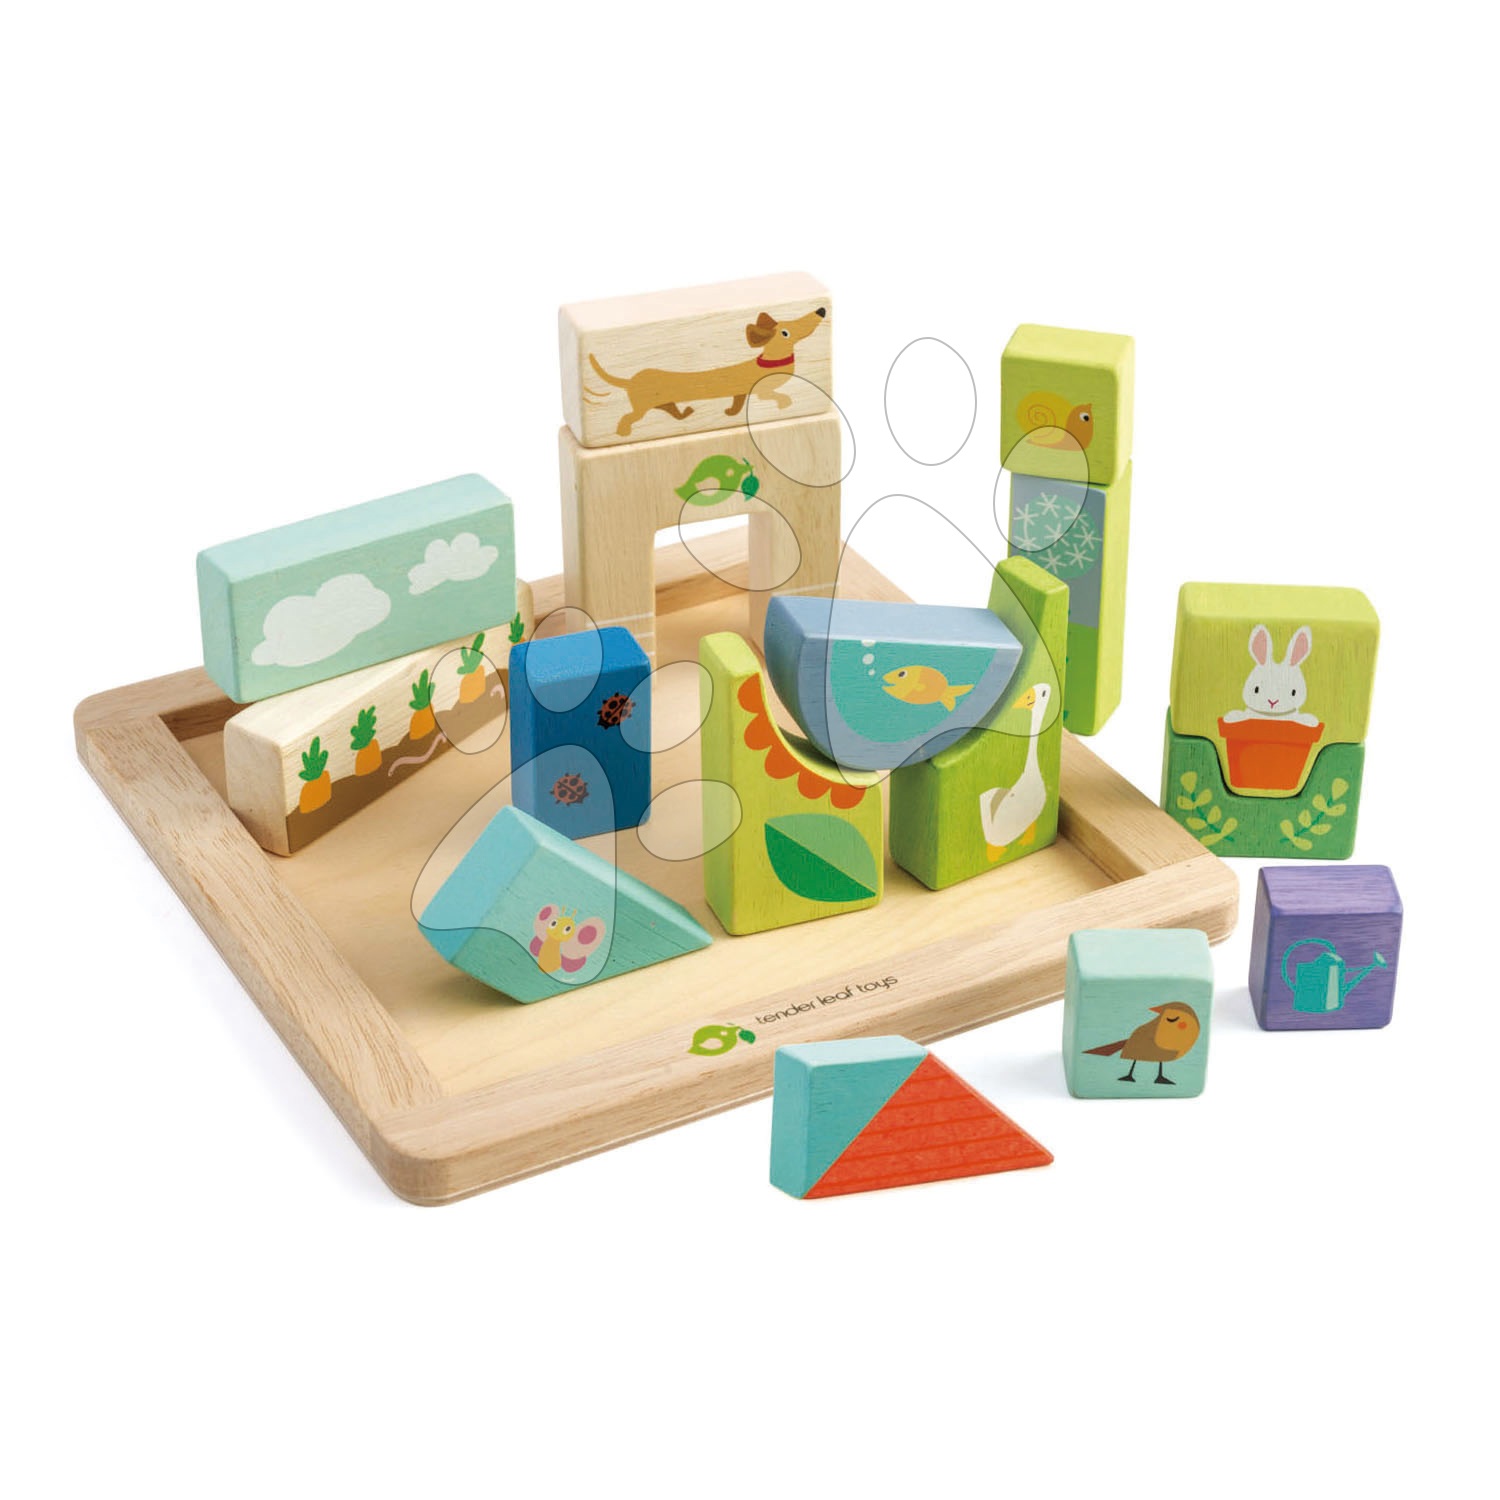 Touch Sensory Tray – Tender Leaf